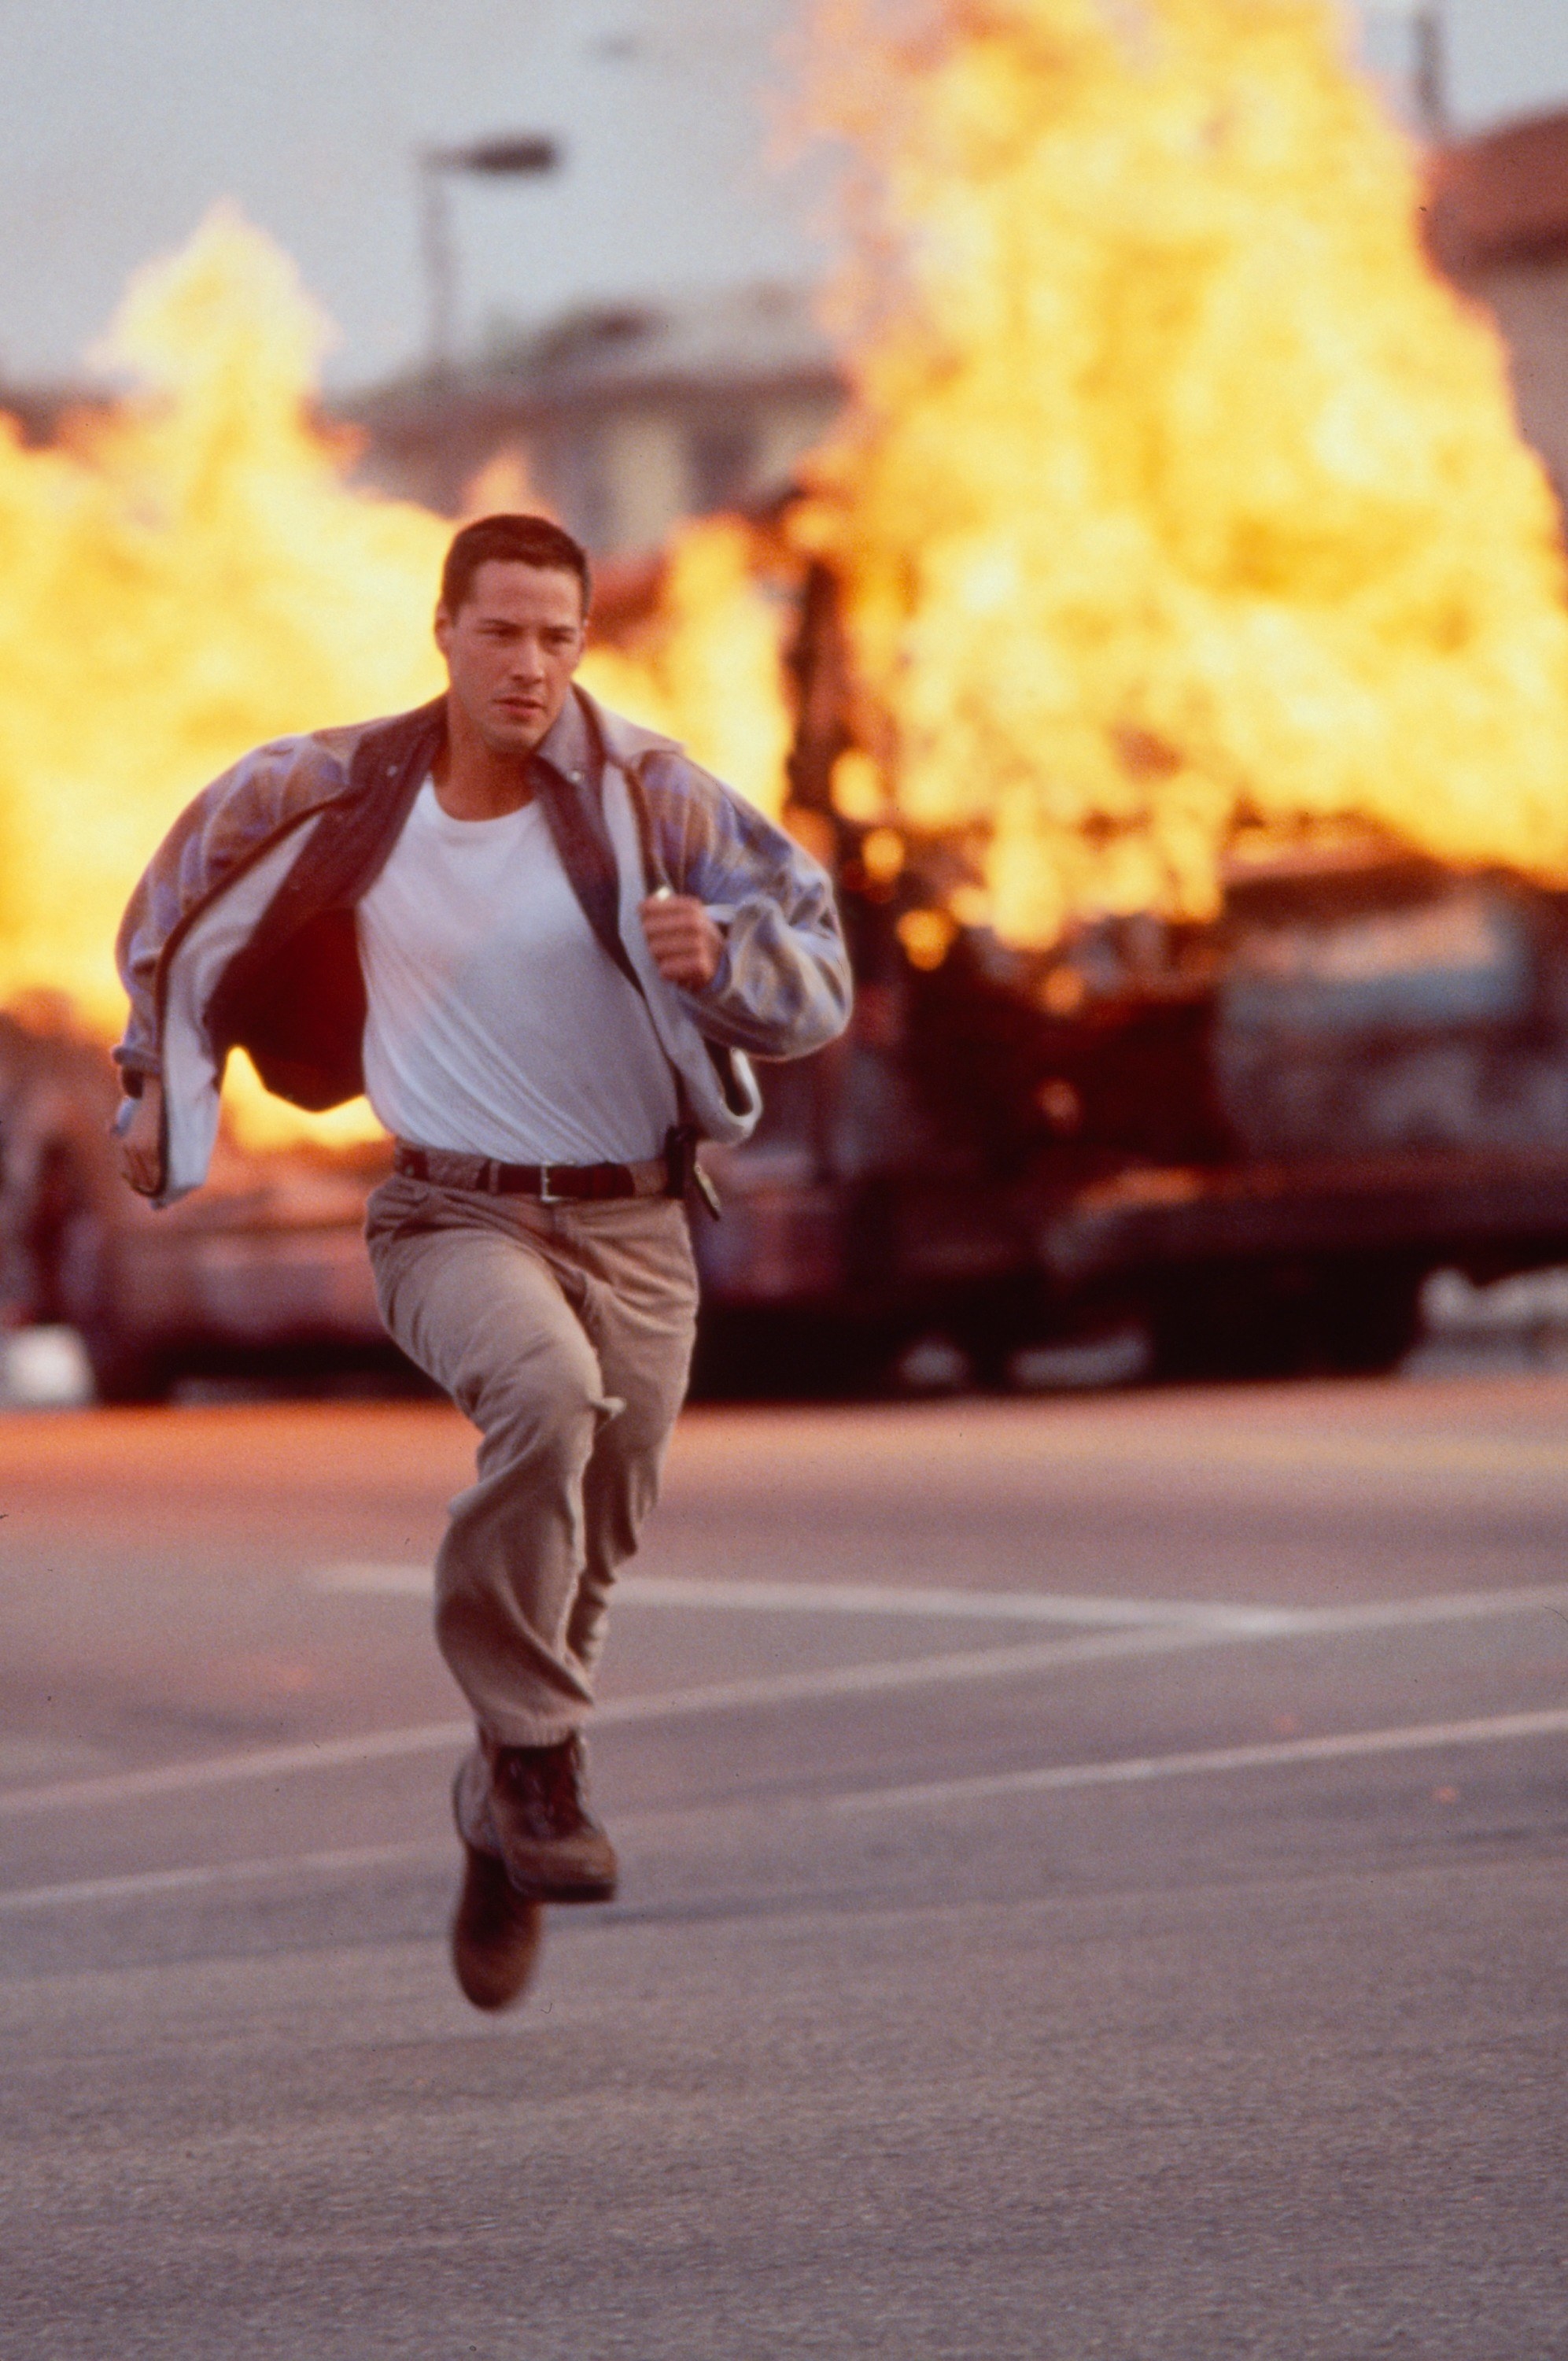 Reeves runs away from an explosion